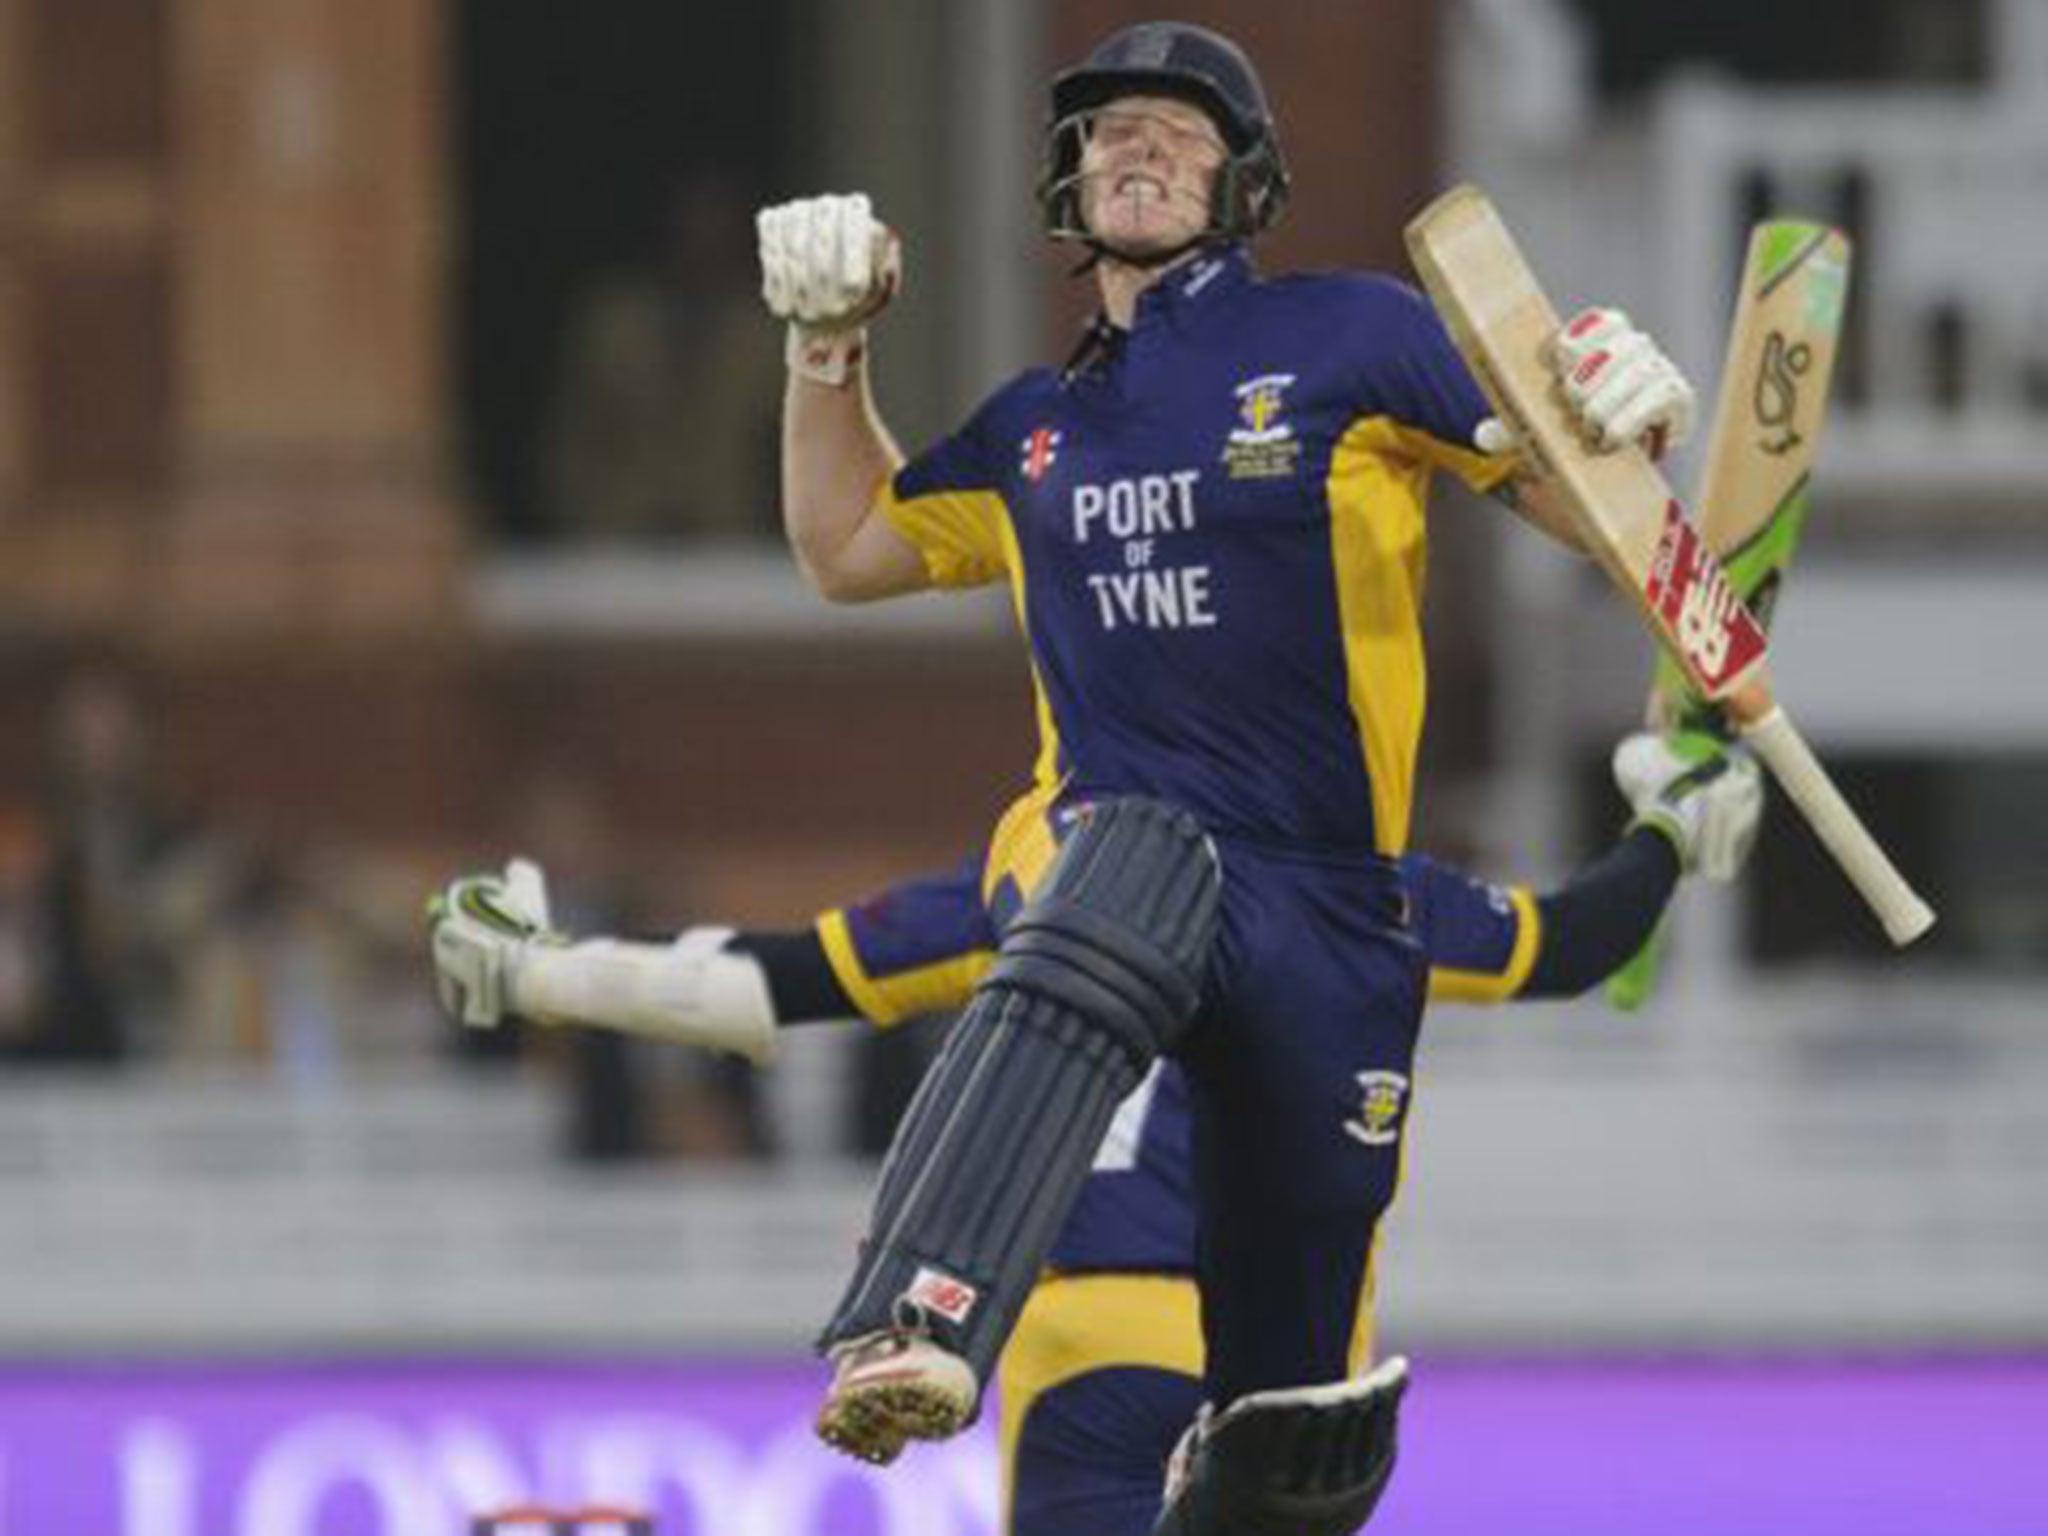 Stoked up: Durham’s Ben Stokes is delighted after his partner Gareth Breese hit the winning boundary at Lord’s